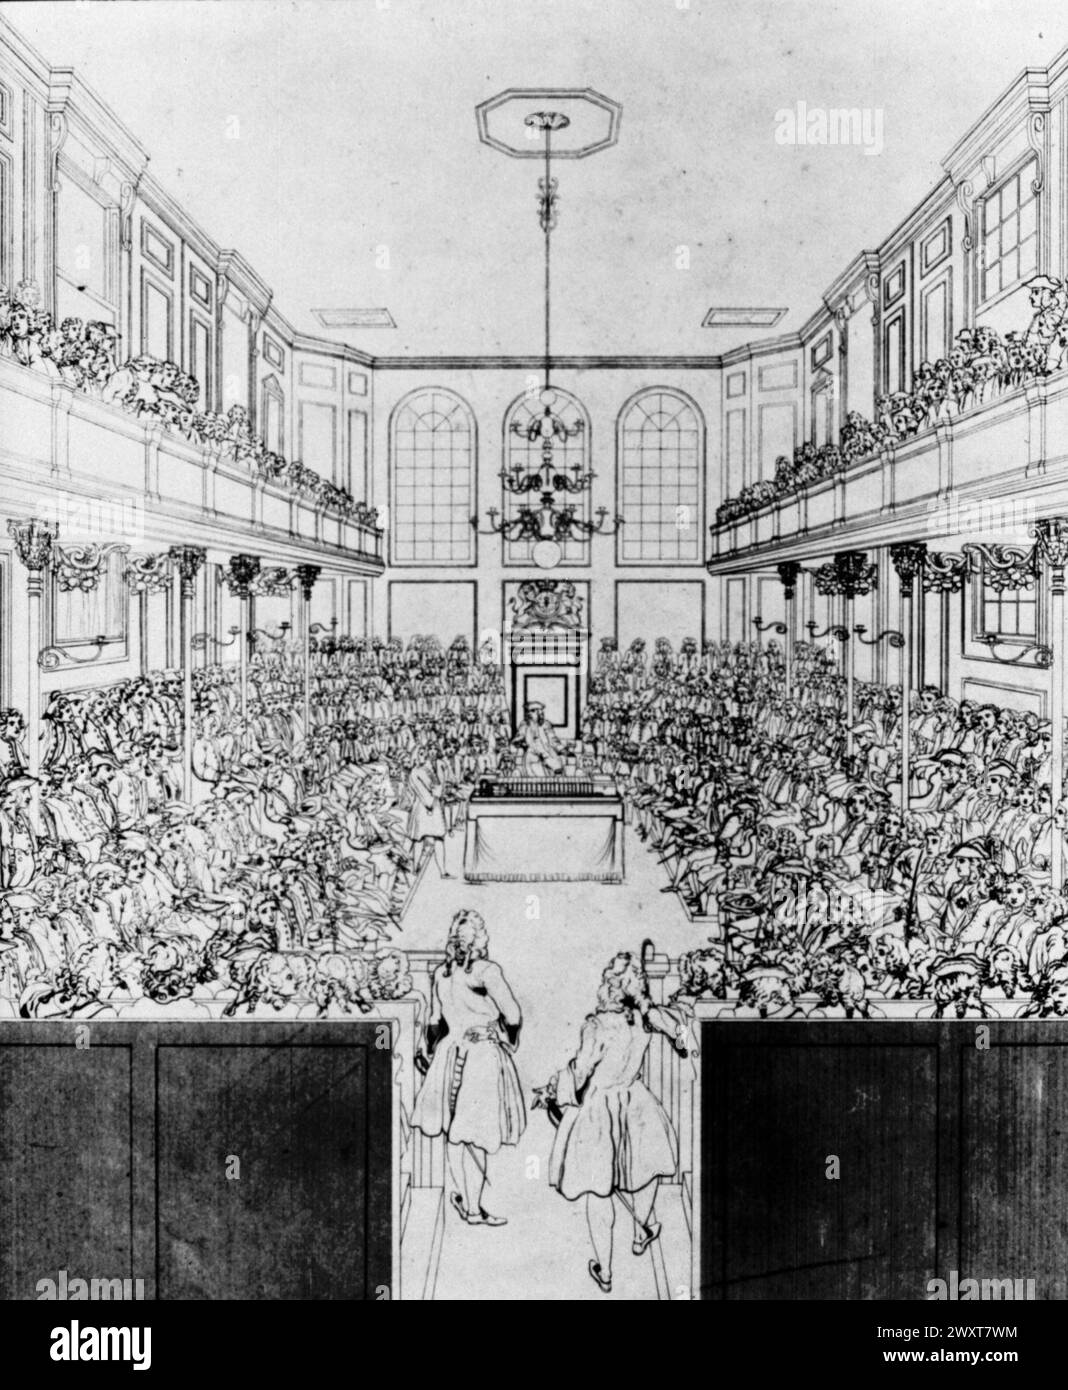 The House of Commons in 1741, England, illustration Stock Photo